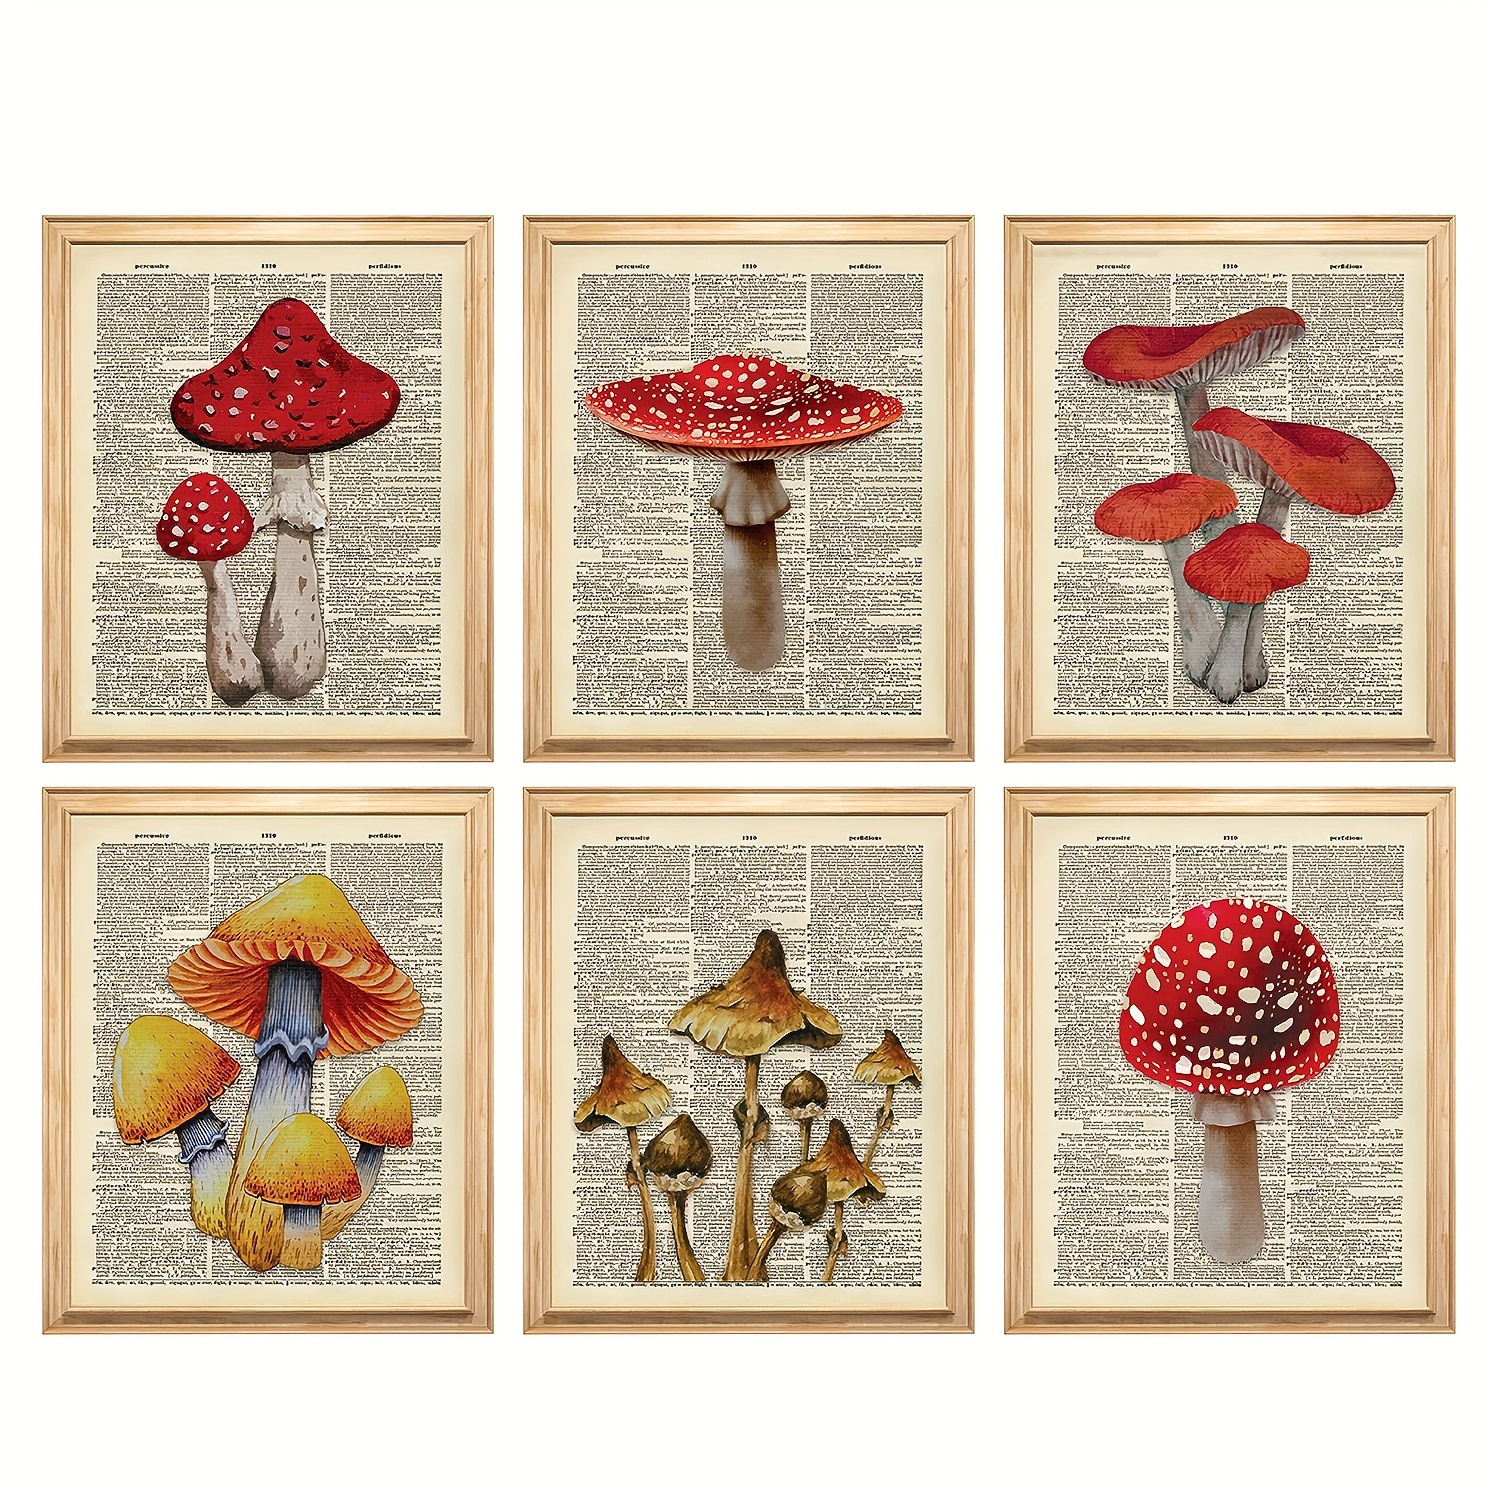 Good Day Retro Aesthetic Poster Room Decor, Vintage Mushrooms Flowers  Positive Quote Motivational Growth Mindset Wall Art Print 16X24 Inch